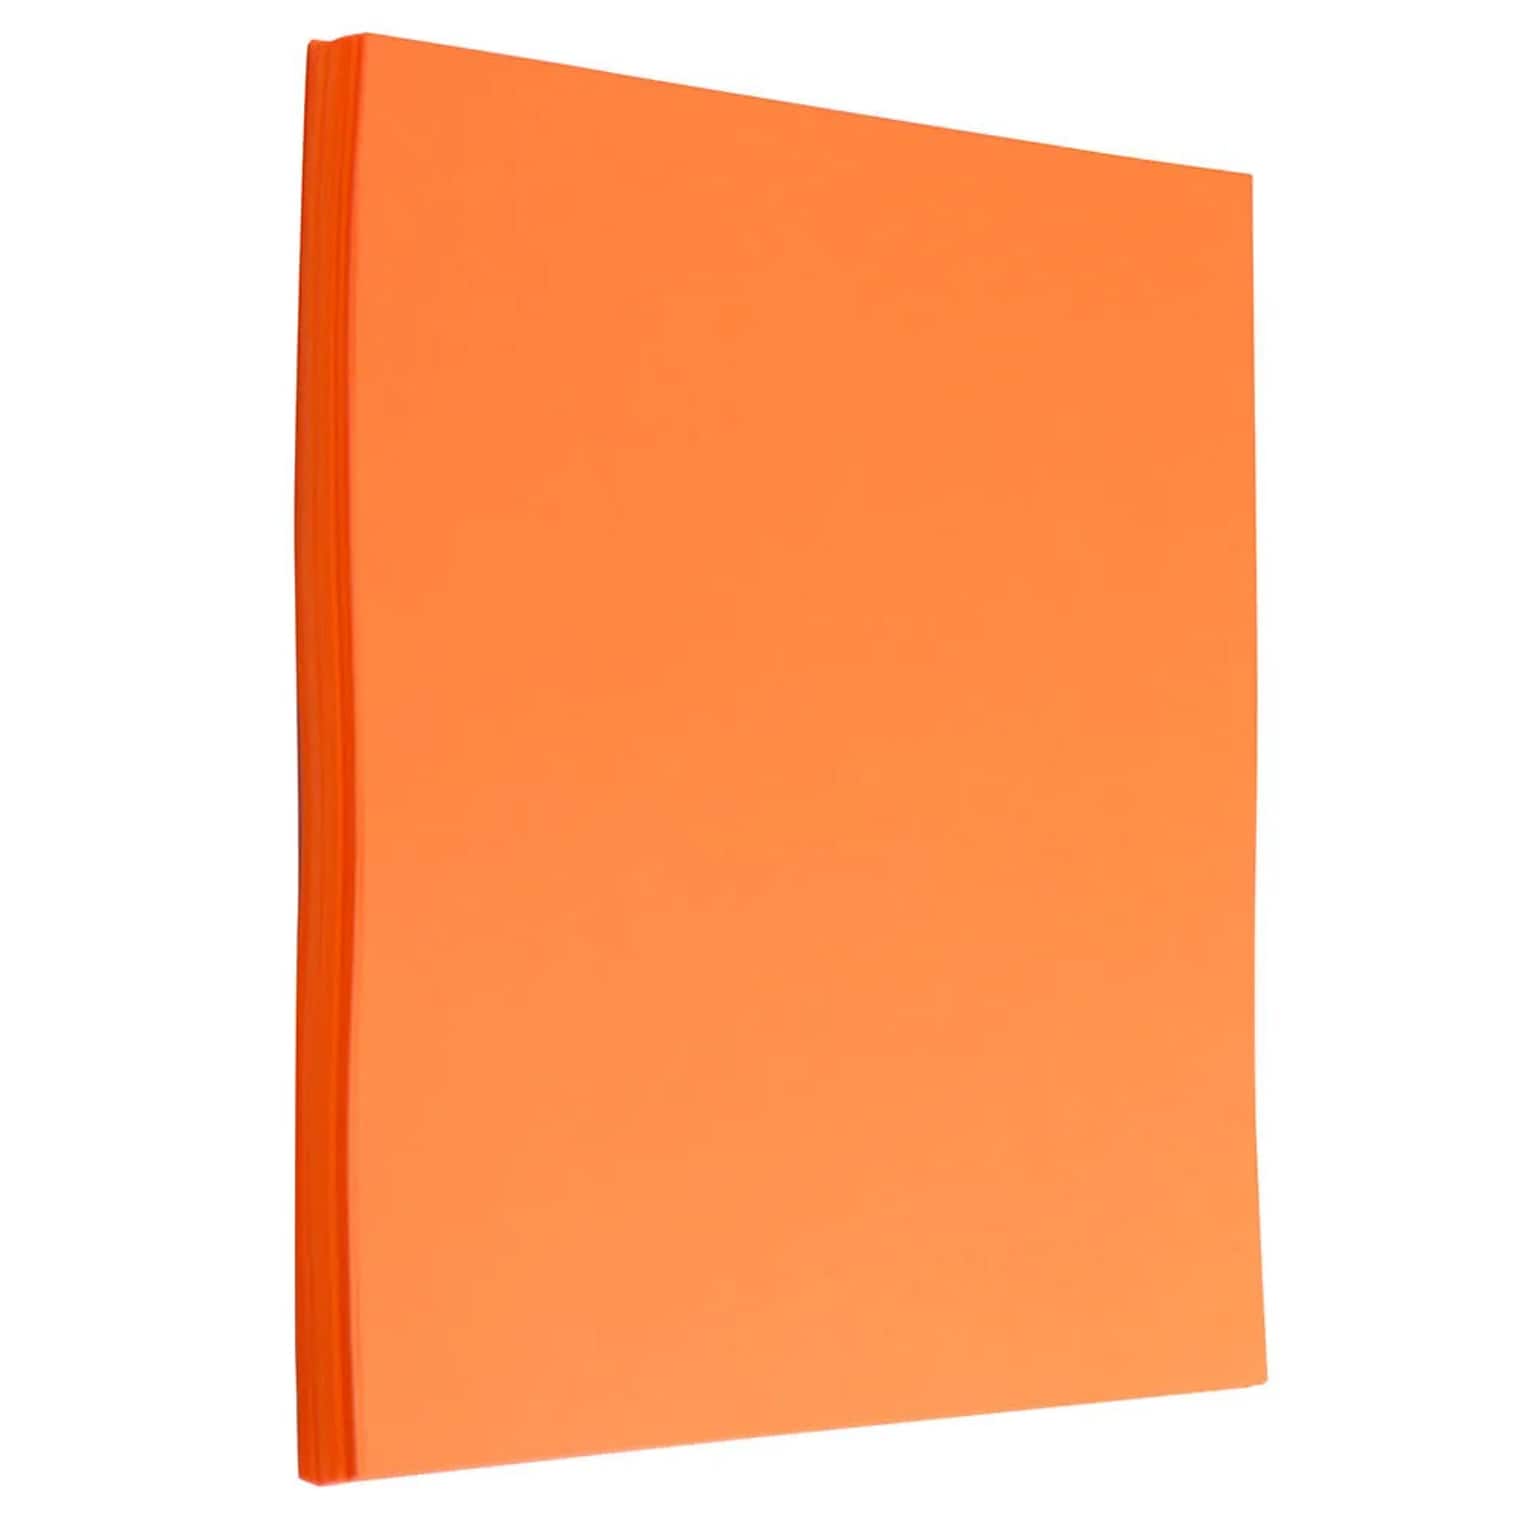 JAM Paper 30% Recycled 8.5 x 11 Colored Paper, 24lb, Ultra Orange, 200 Sheets/Pack (102558G)